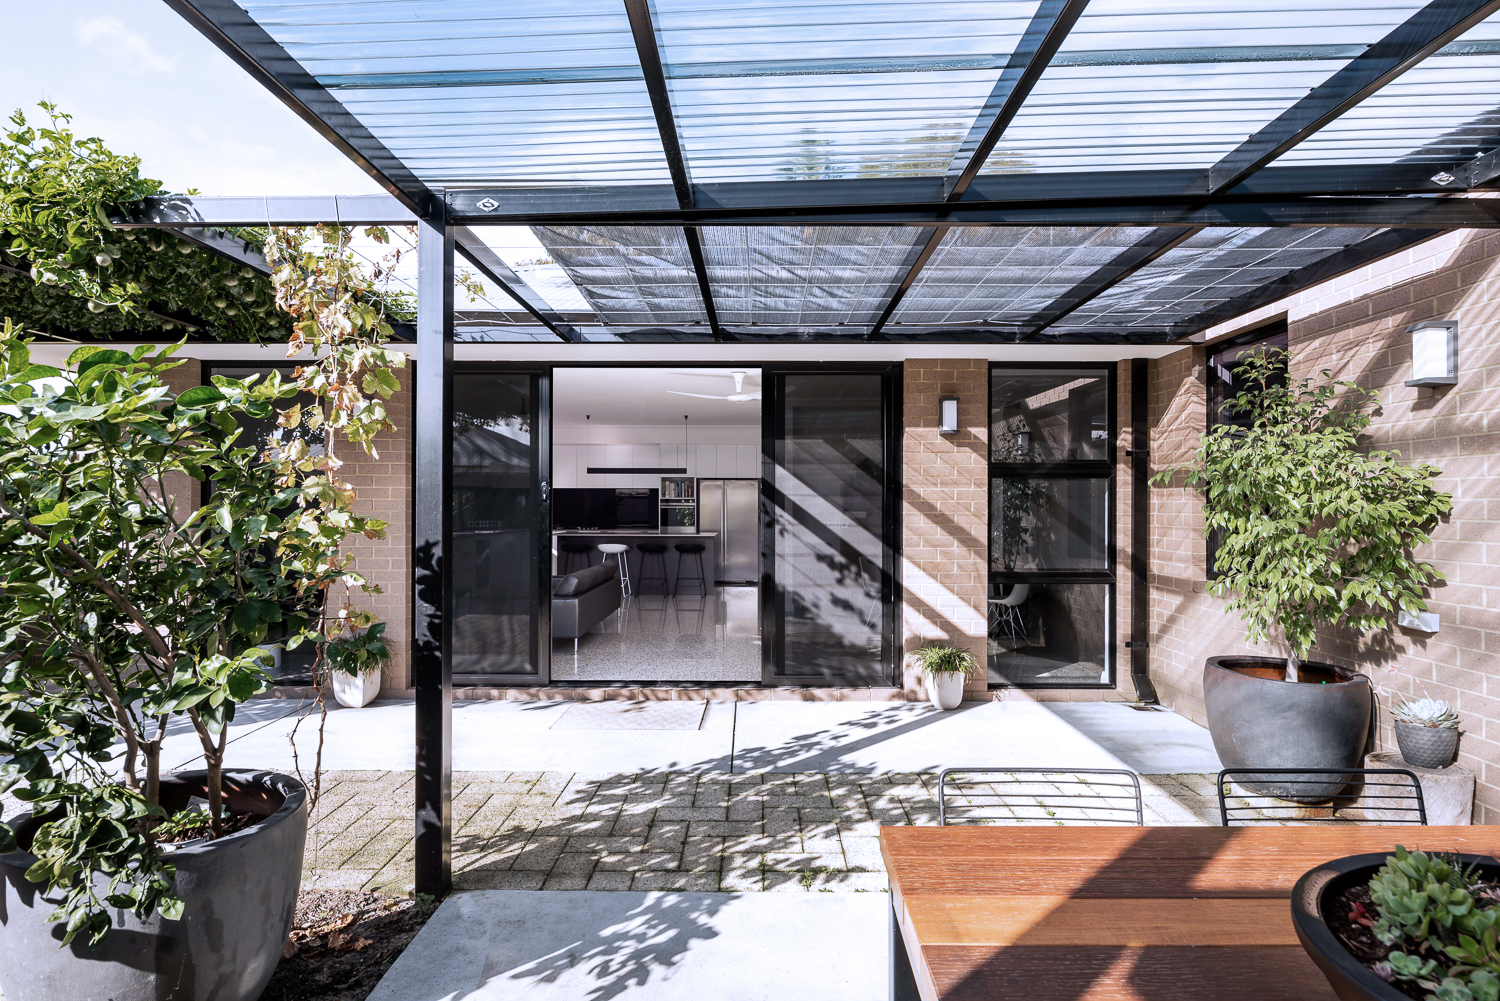 North-facing, rear exterior of the James Street Residence, by Romona Sandon Designs.